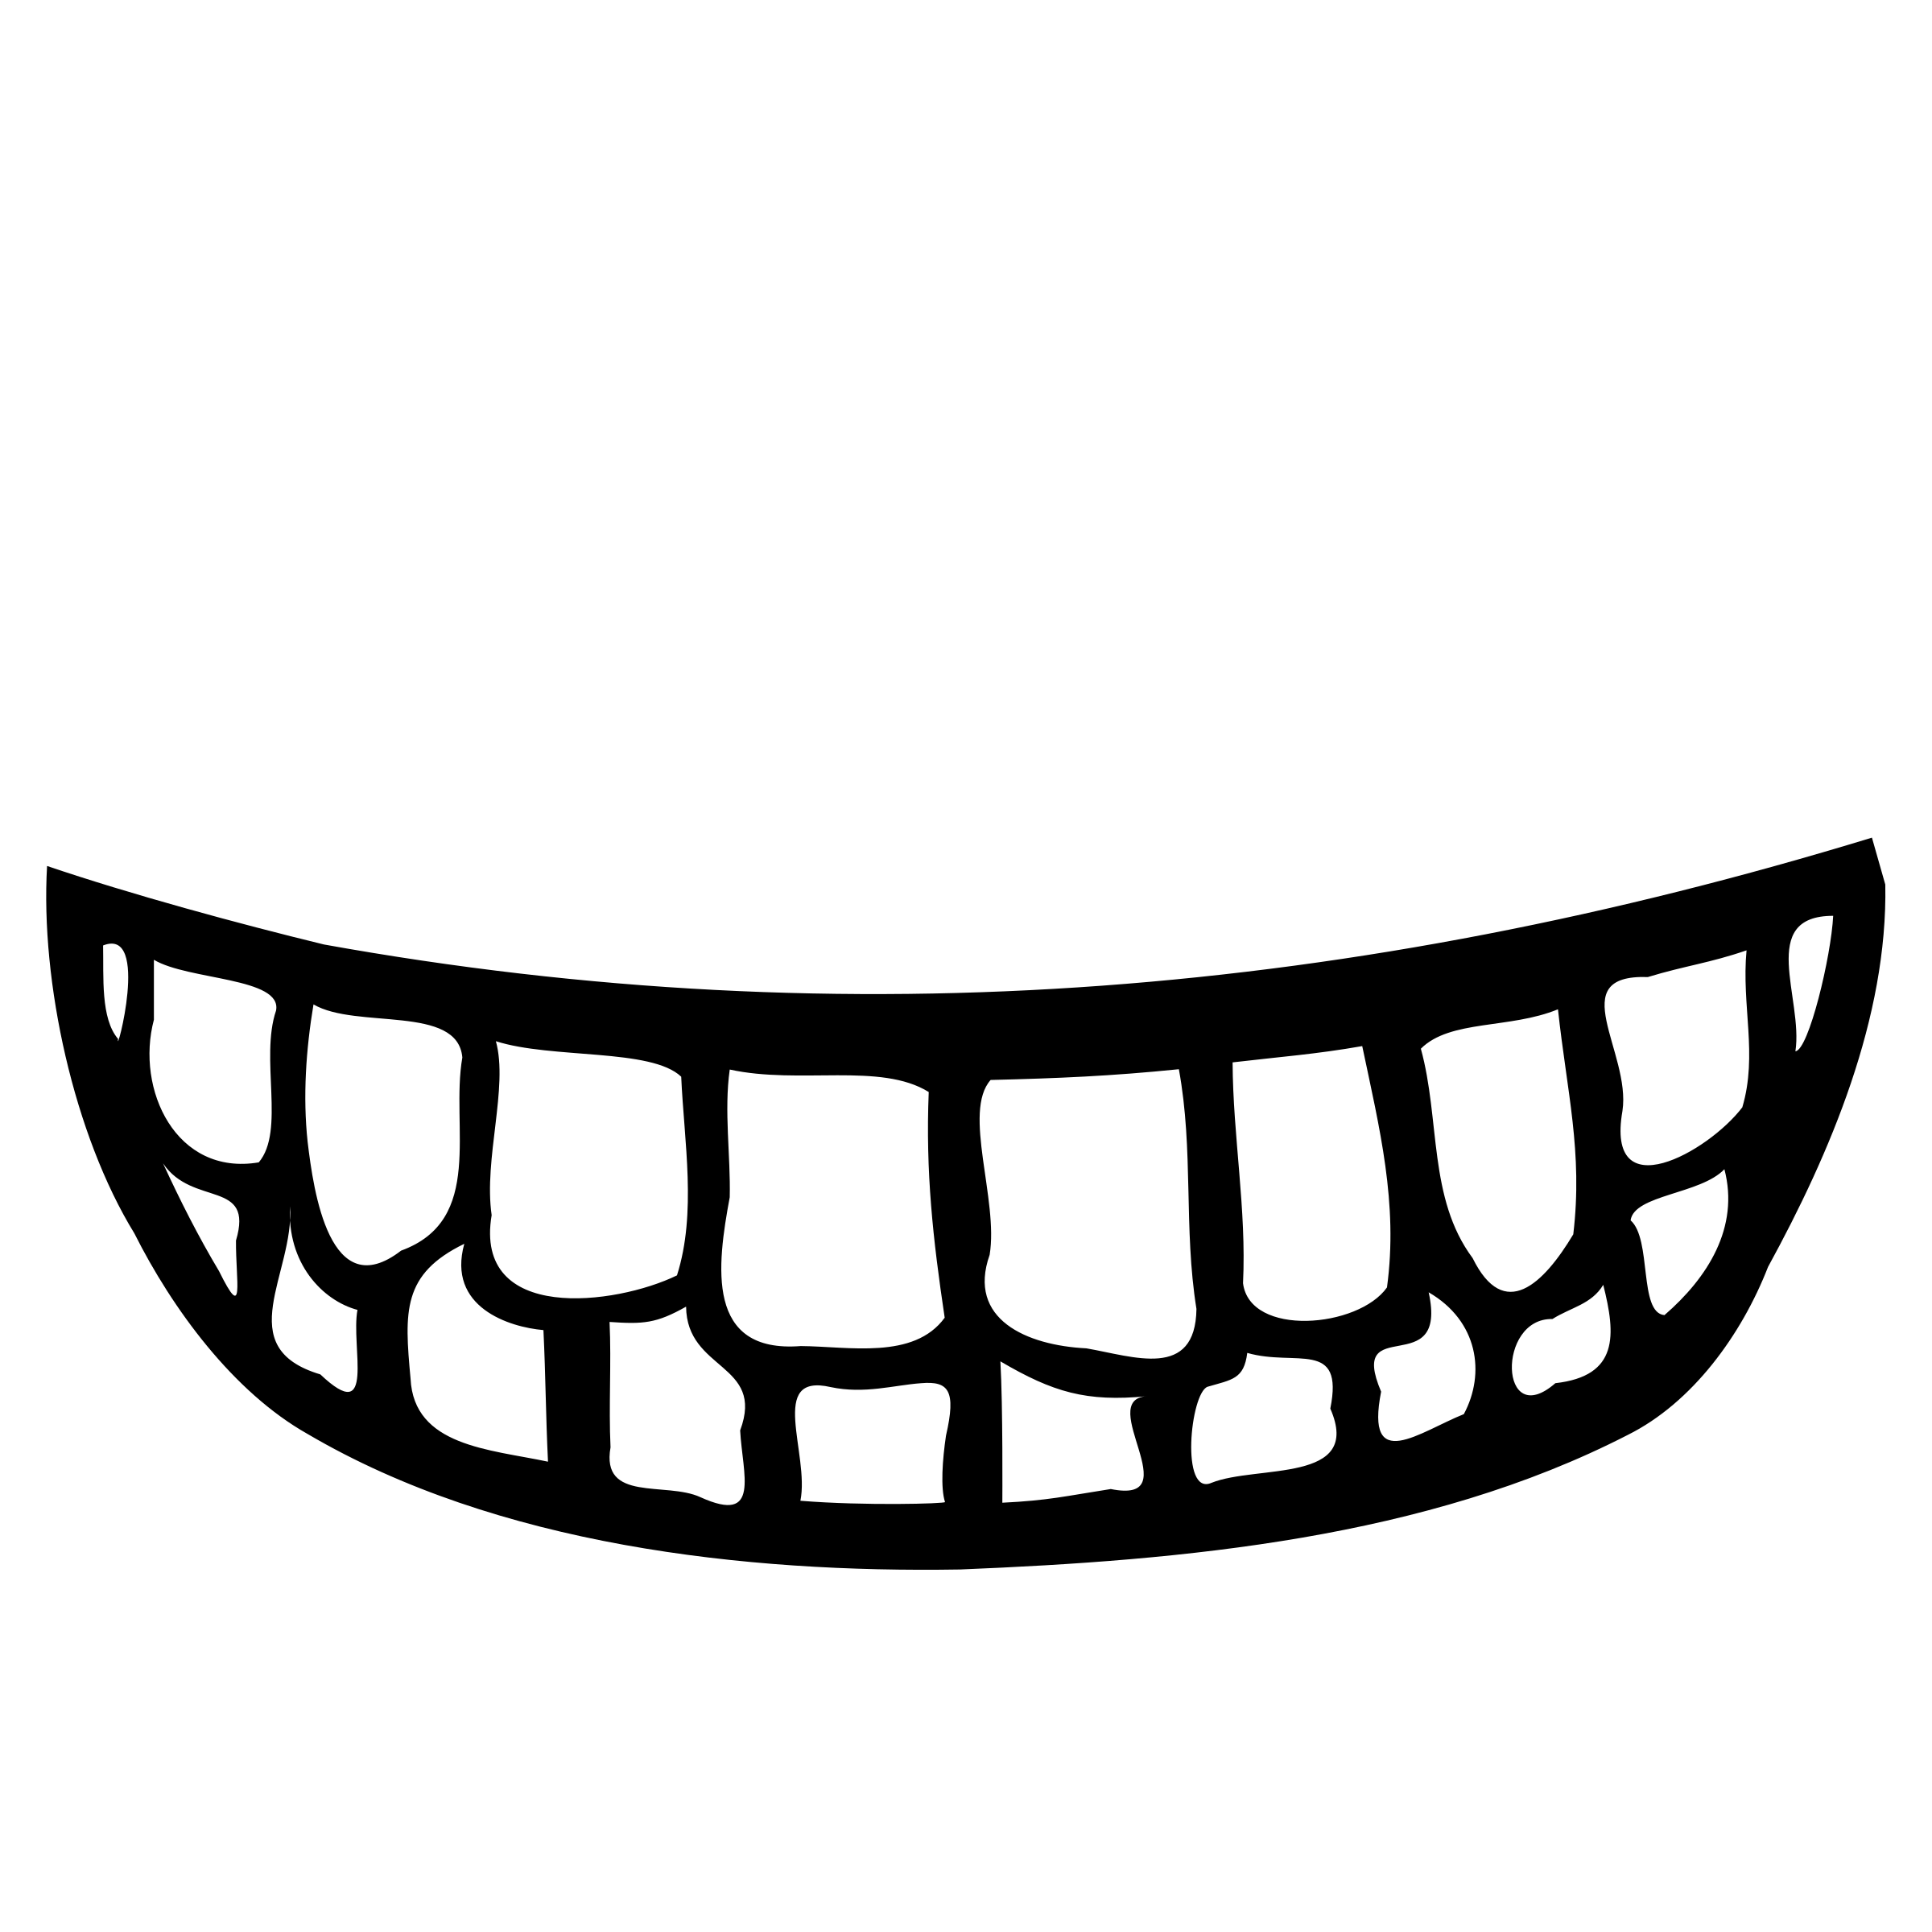 Free Smiling Mouth Cliparts, Download Free Clip Art, Free